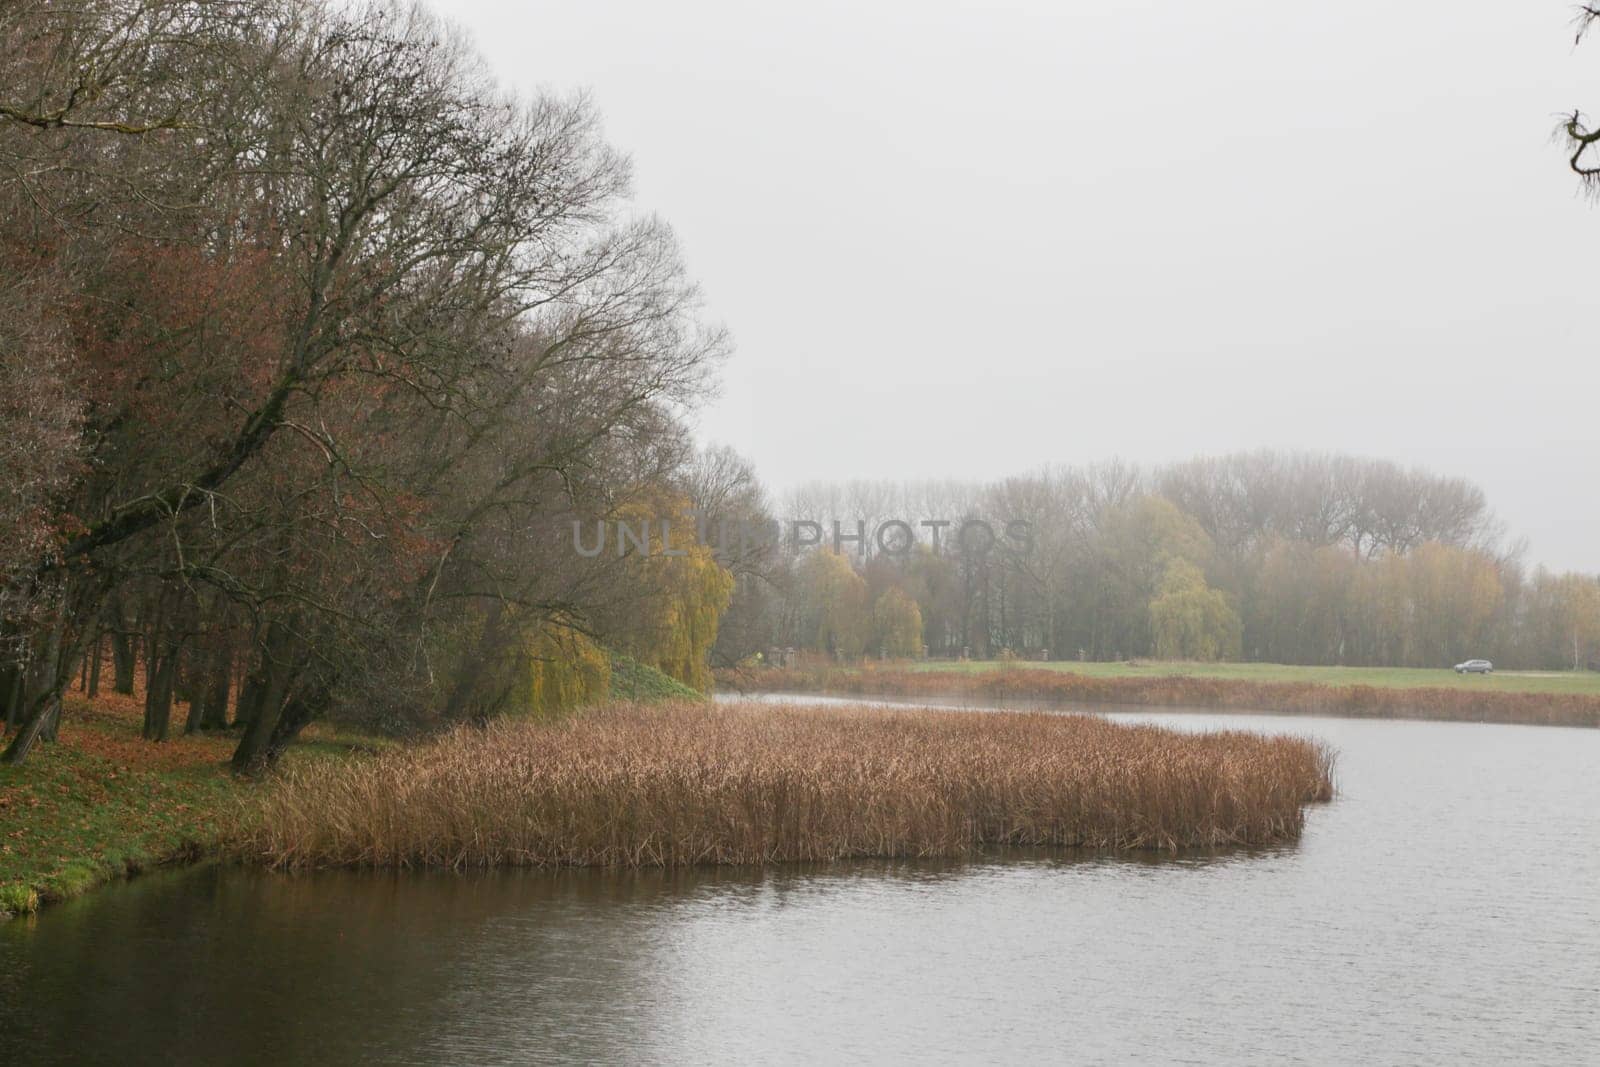 Dull autumn landscape. River bank with trees without leaves.